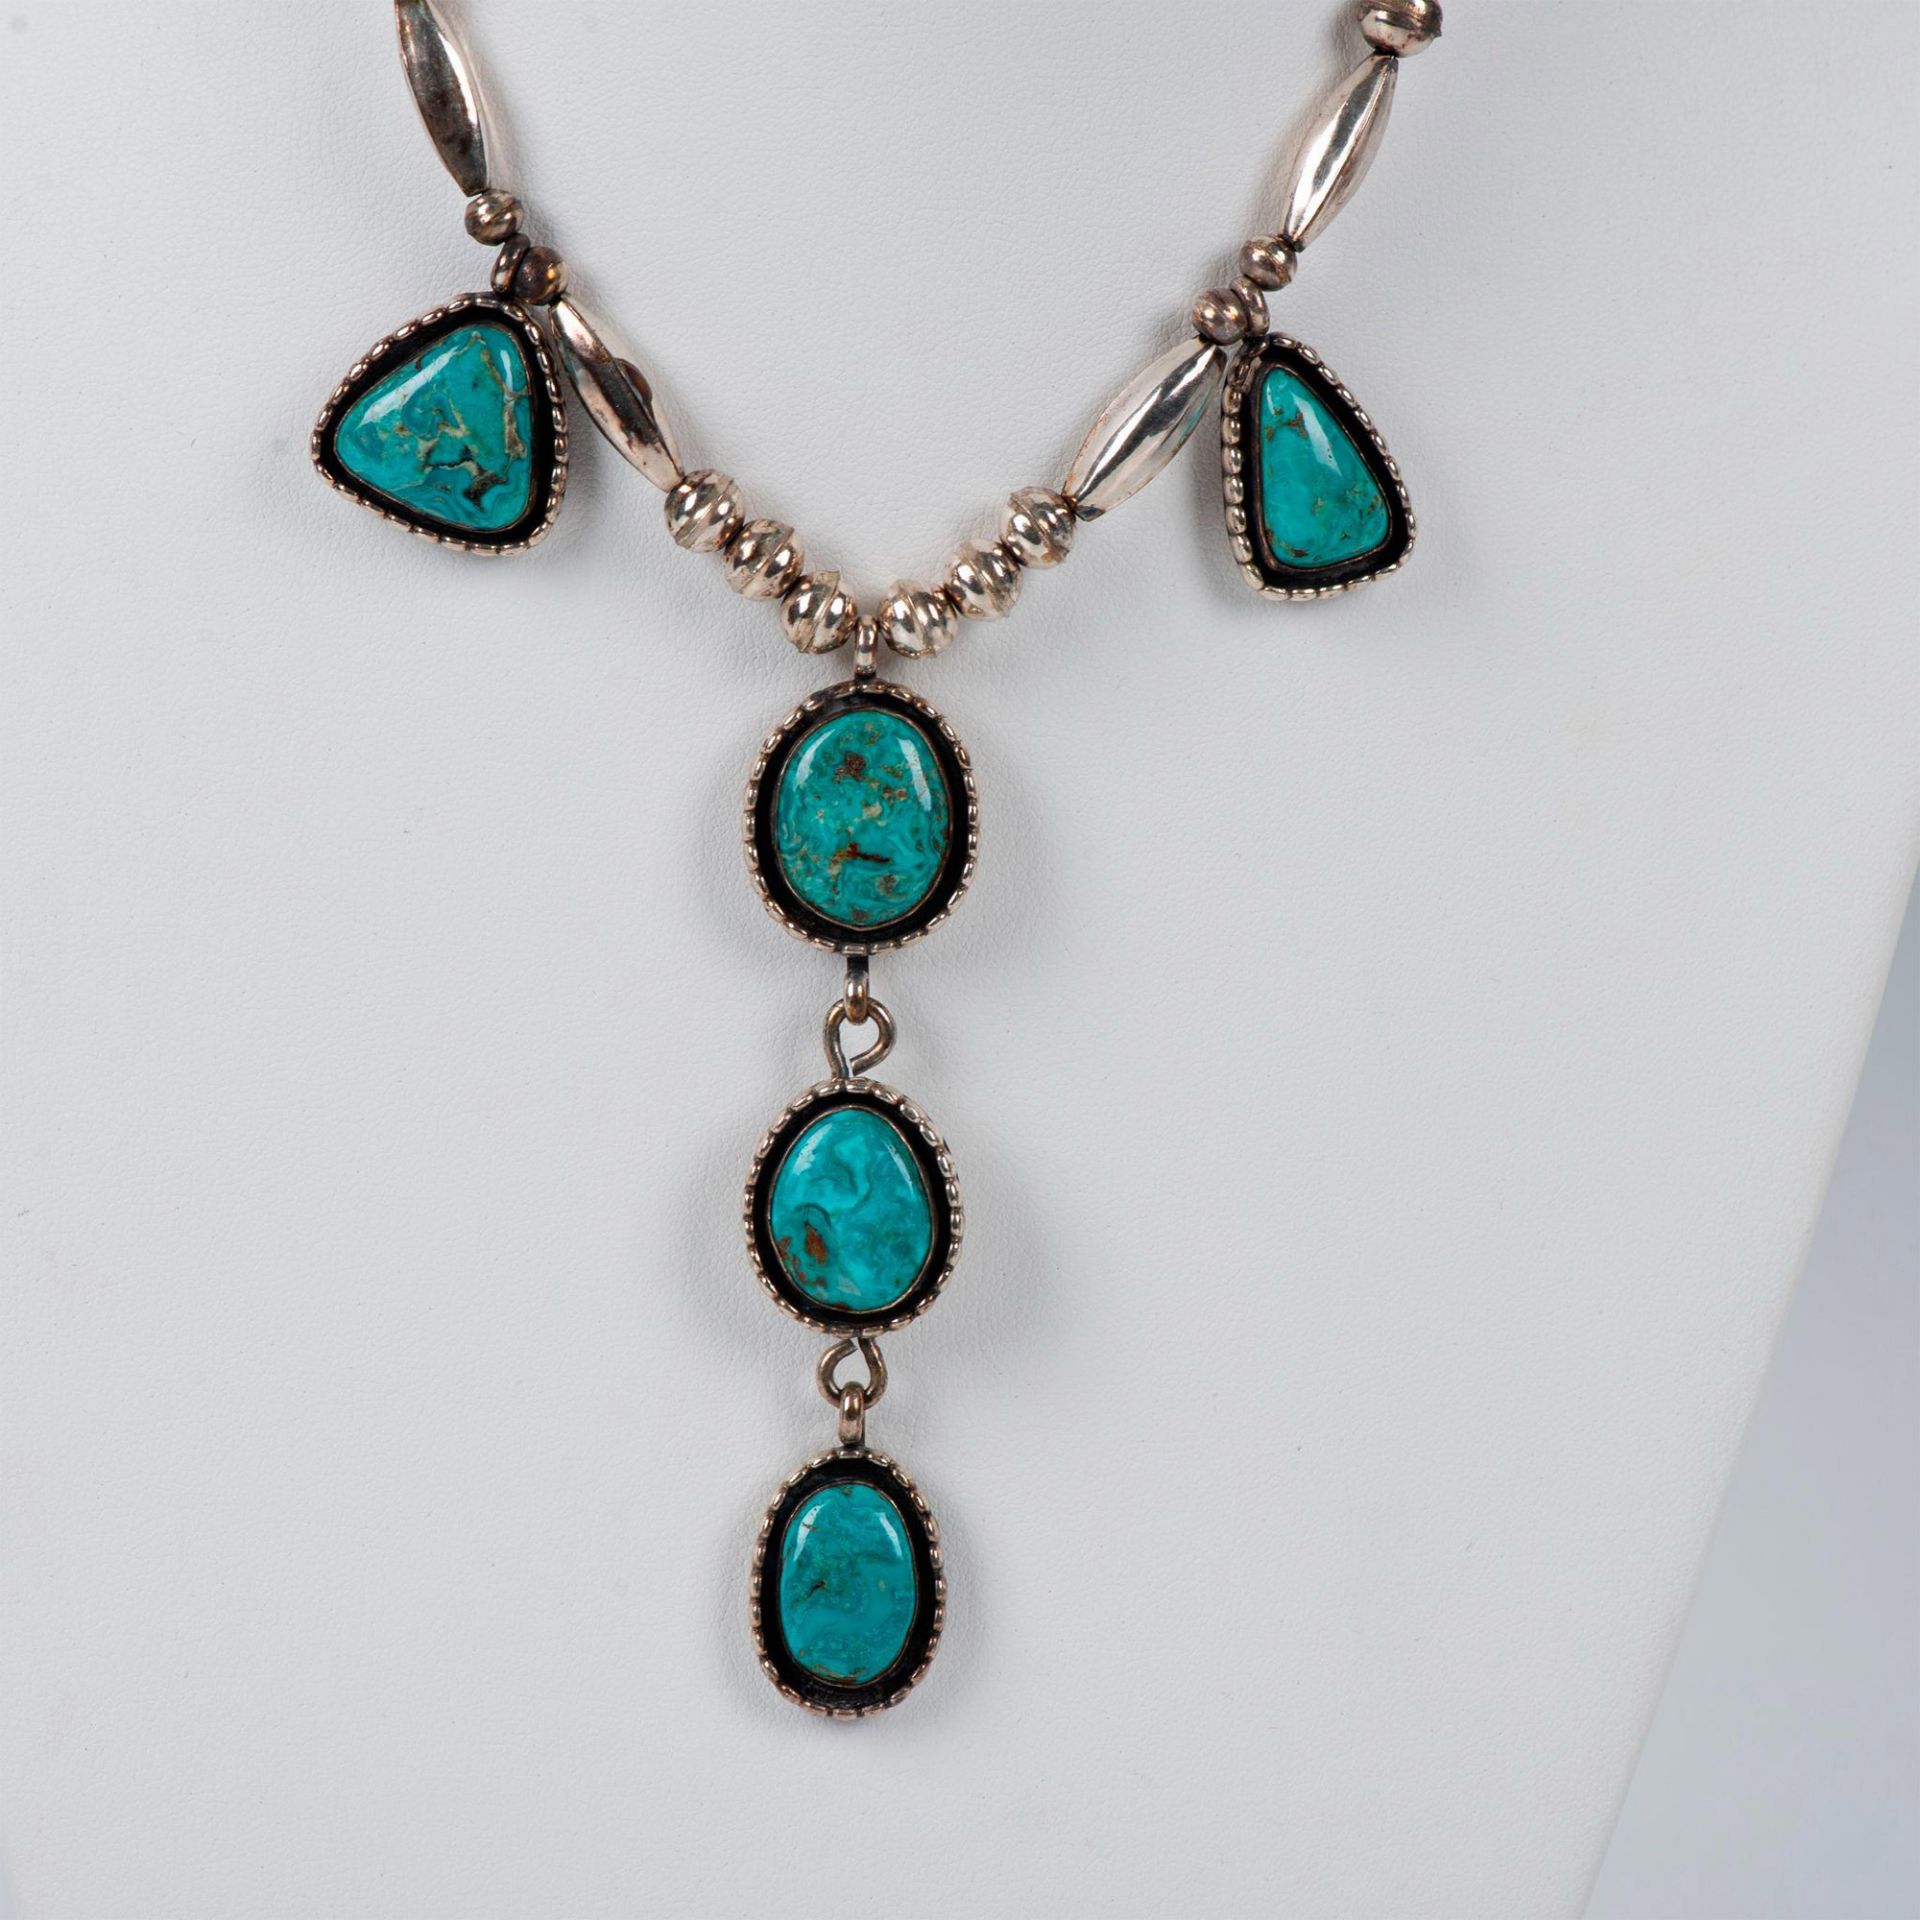 Pretty Native American Sterling Silver & Turquoise Necklace - Image 2 of 4